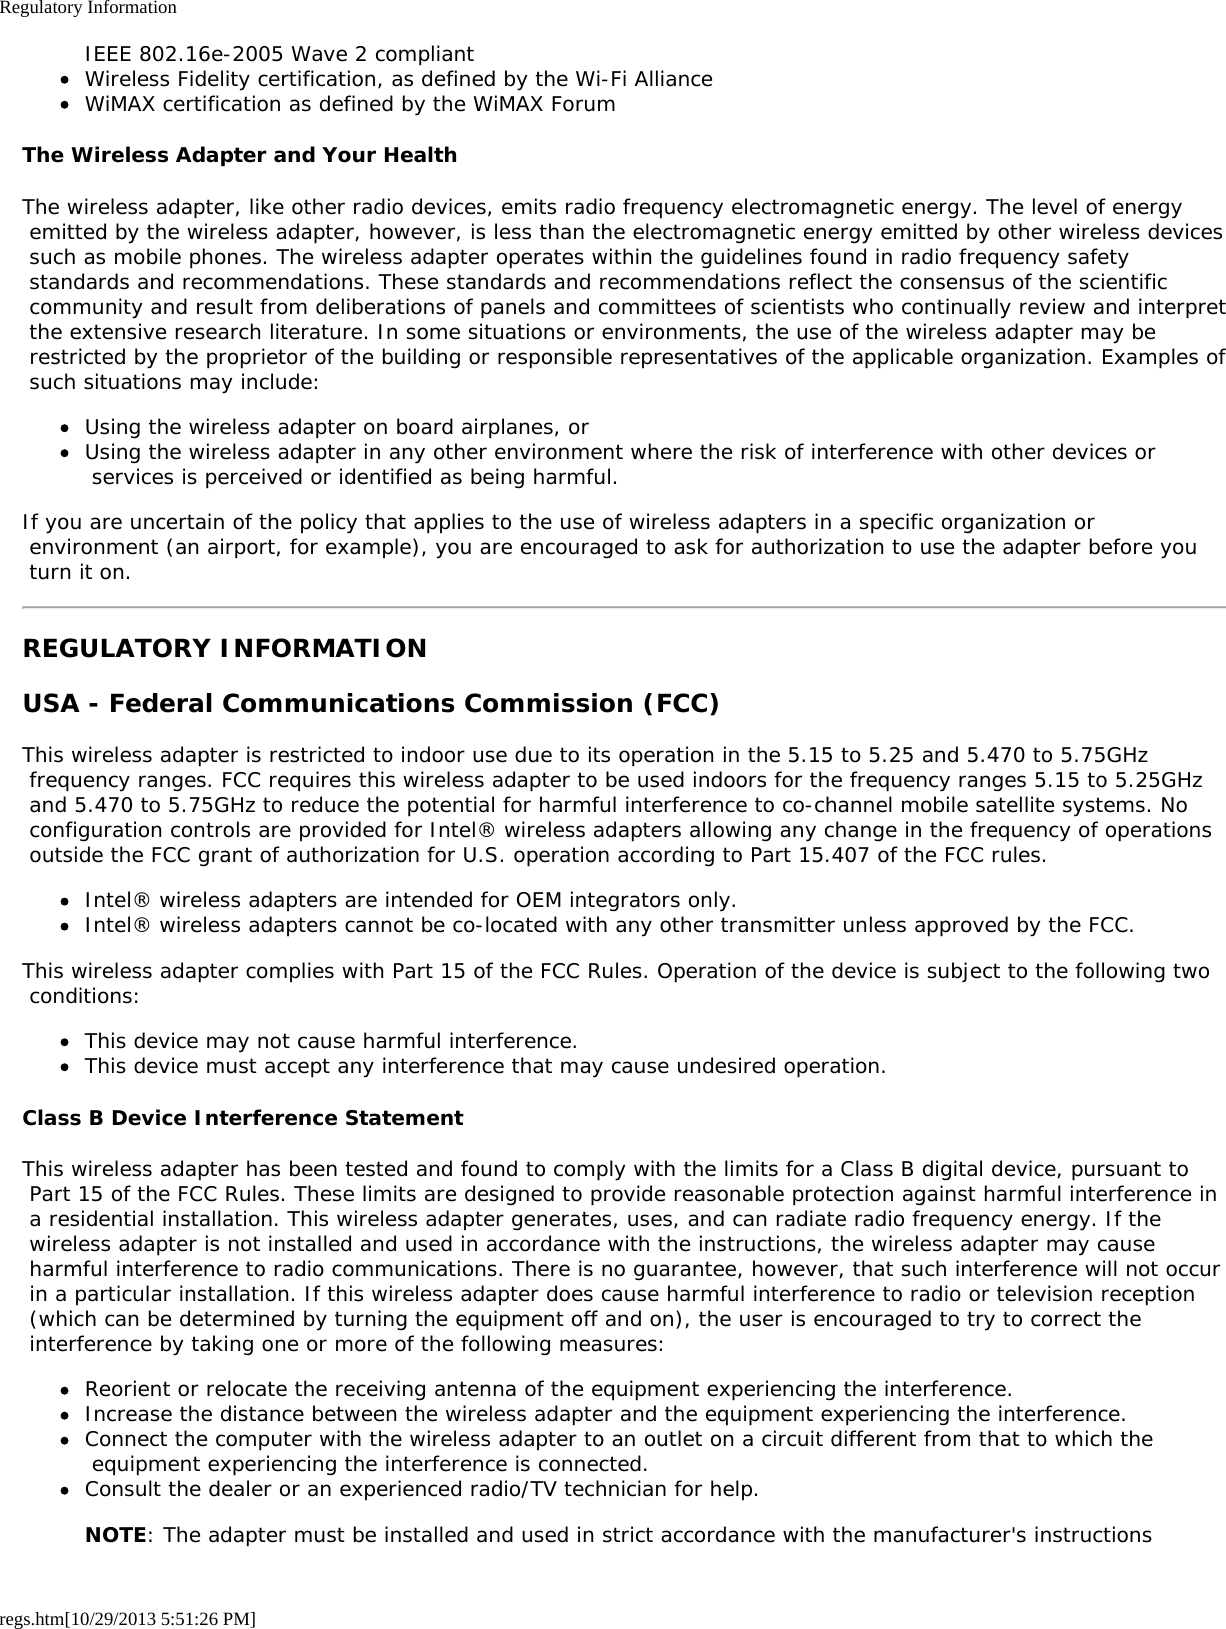 Regulatory Informationregs.htm[10/29/2013 5:51:26 PM]IEEE 802.16e-2005 Wave 2 compliantWireless Fidelity certification, as defined by the Wi-Fi AllianceWiMAX certification as defined by the WiMAX ForumThe Wireless Adapter and Your HealthThe wireless adapter, like other radio devices, emits radio frequency electromagnetic energy. The level of energy emitted by the wireless adapter, however, is less than the electromagnetic energy emitted by other wireless devices such as mobile phones. The wireless adapter operates within the guidelines found in radio frequency safety standards and recommendations. These standards and recommendations reflect the consensus of the scientific community and result from deliberations of panels and committees of scientists who continually review and interpret the extensive research literature. In some situations or environments, the use of the wireless adapter may be restricted by the proprietor of the building or responsible representatives of the applicable organization. Examples of such situations may include:Using the wireless adapter on board airplanes, orUsing the wireless adapter in any other environment where the risk of interference with other devices or services is perceived or identified as being harmful.If you are uncertain of the policy that applies to the use of wireless adapters in a specific organization or environment (an airport, for example), you are encouraged to ask for authorization to use the adapter before you turn it on.REGULATORY INFORMATIONUSA - Federal Communications Commission (FCC)This wireless adapter is restricted to indoor use due to its operation in the 5.15 to 5.25 and 5.470 to 5.75GHz frequency ranges. FCC requires this wireless adapter to be used indoors for the frequency ranges 5.15 to 5.25GHz and 5.470 to 5.75GHz to reduce the potential for harmful interference to co-channel mobile satellite systems. No configuration controls are provided for Intel® wireless adapters allowing any change in the frequency of operations outside the FCC grant of authorization for U.S. operation according to Part 15.407 of the FCC rules.Intel® wireless adapters are intended for OEM integrators only.Intel® wireless adapters cannot be co-located with any other transmitter unless approved by the FCC.This wireless adapter complies with Part 15 of the FCC Rules. Operation of the device is subject to the following two conditions:This device may not cause harmful interference.This device must accept any interference that may cause undesired operation.Class B Device Interference StatementThis wireless adapter has been tested and found to comply with the limits for a Class B digital device, pursuant to Part 15 of the FCC Rules. These limits are designed to provide reasonable protection against harmful interference in a residential installation. This wireless adapter generates, uses, and can radiate radio frequency energy. If the wireless adapter is not installed and used in accordance with the instructions, the wireless adapter may cause harmful interference to radio communications. There is no guarantee, however, that such interference will not occur in a particular installation. If this wireless adapter does cause harmful interference to radio or television reception (which can be determined by turning the equipment off and on), the user is encouraged to try to correct the interference by taking one or more of the following measures:Reorient or relocate the receiving antenna of the equipment experiencing the interference.Increase the distance between the wireless adapter and the equipment experiencing the interference.Connect the computer with the wireless adapter to an outlet on a circuit different from that to which the equipment experiencing the interference is connected.Consult the dealer or an experienced radio/TV technician for help.NOTE: The adapter must be installed and used in strict accordance with the manufacturer&apos;s instructions